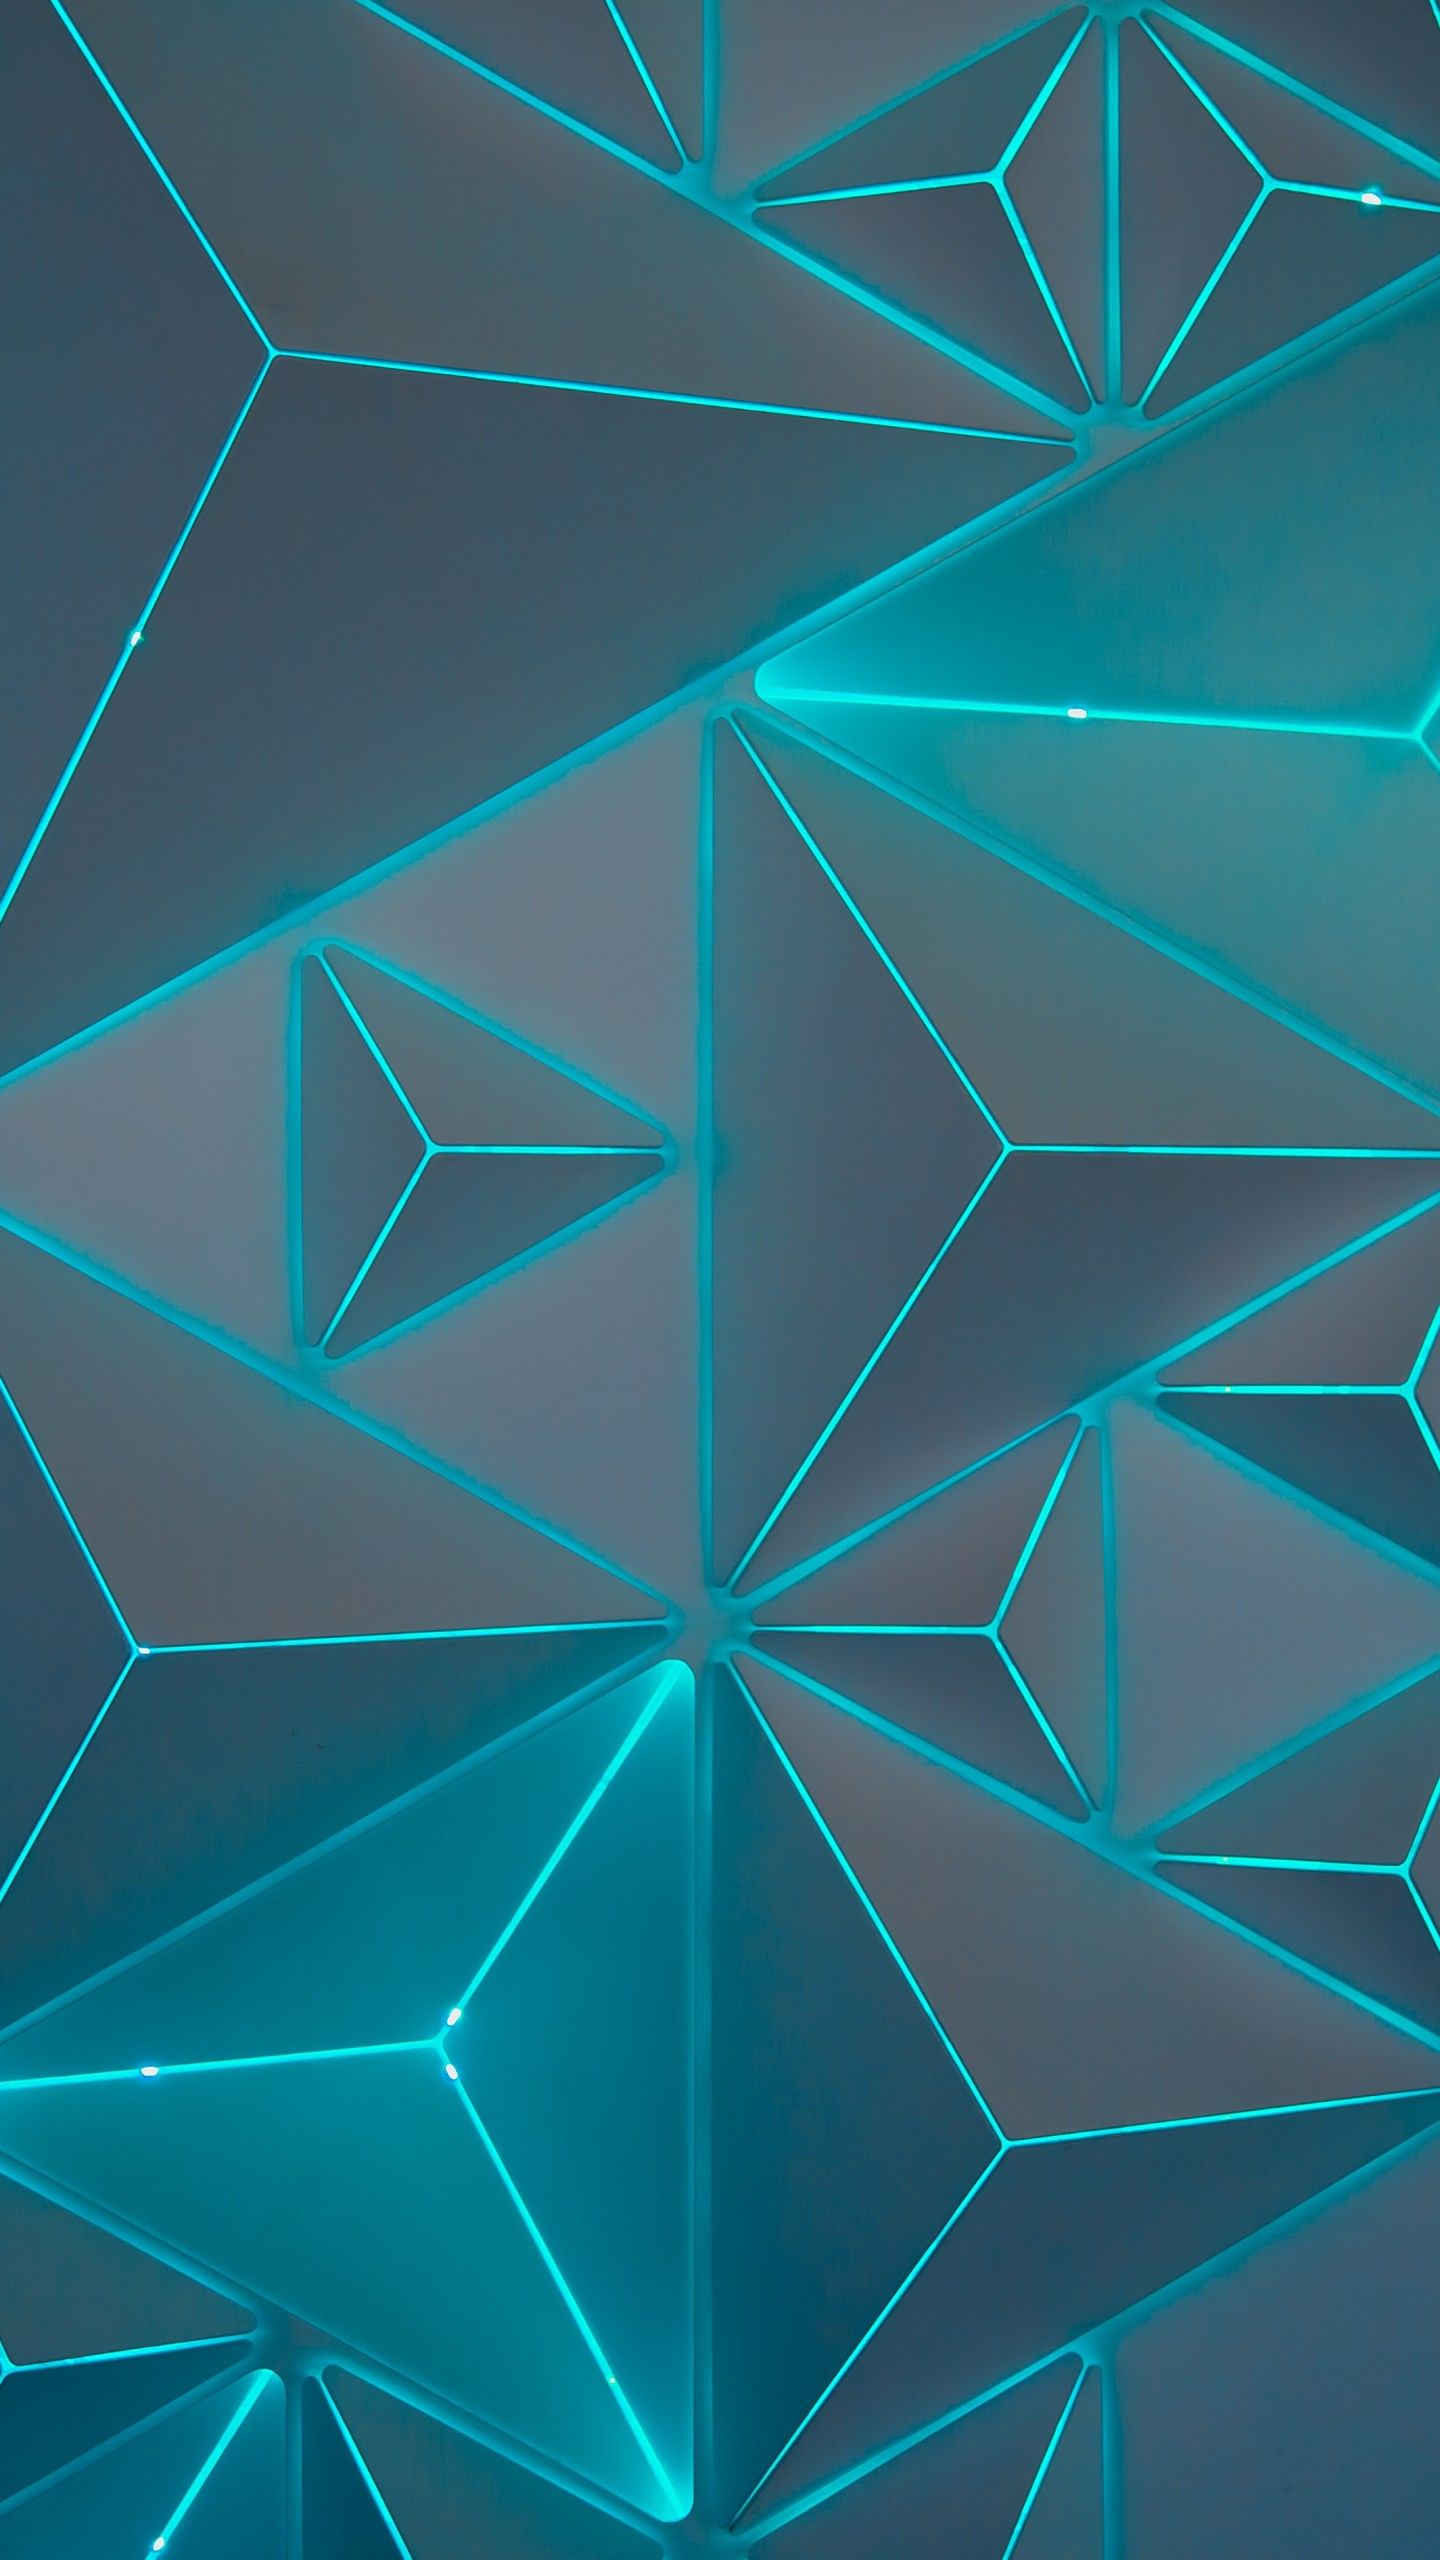 Wallpaper Triangles, Neon, Turquoise, Teal, Geometric, Pattern, 5K